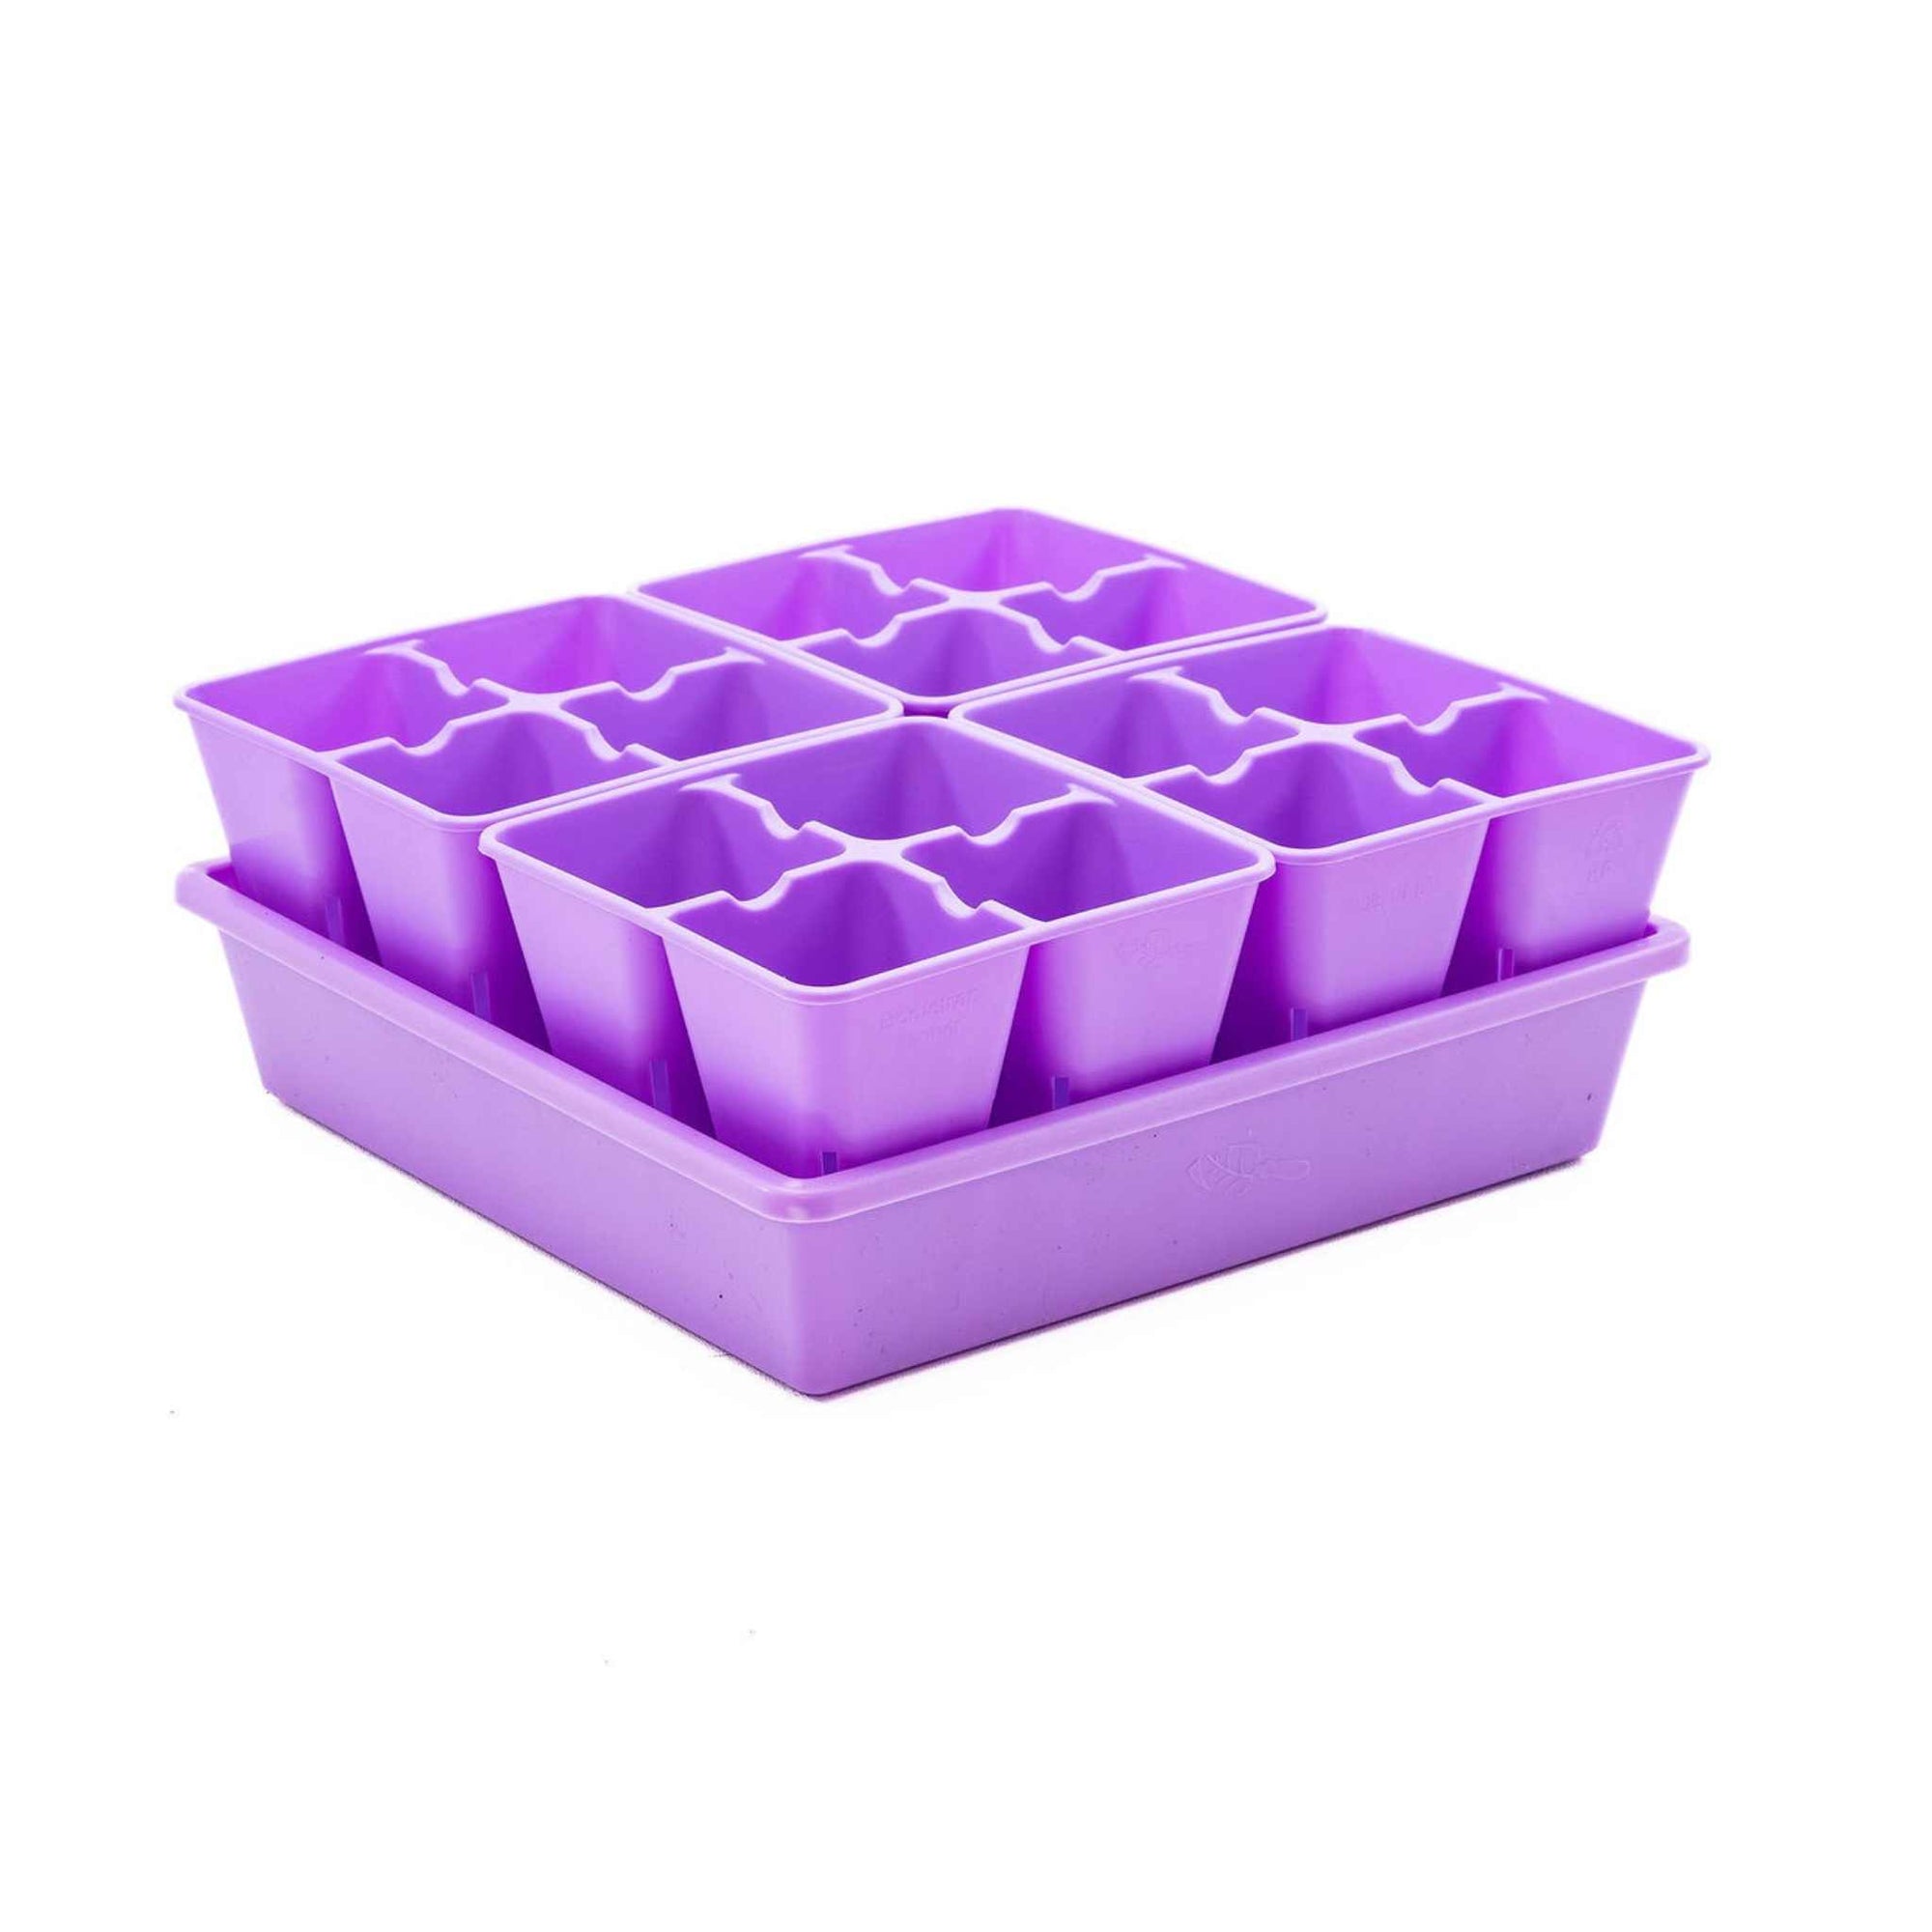 Purple 4 Cell plug trays in a 1010 tray